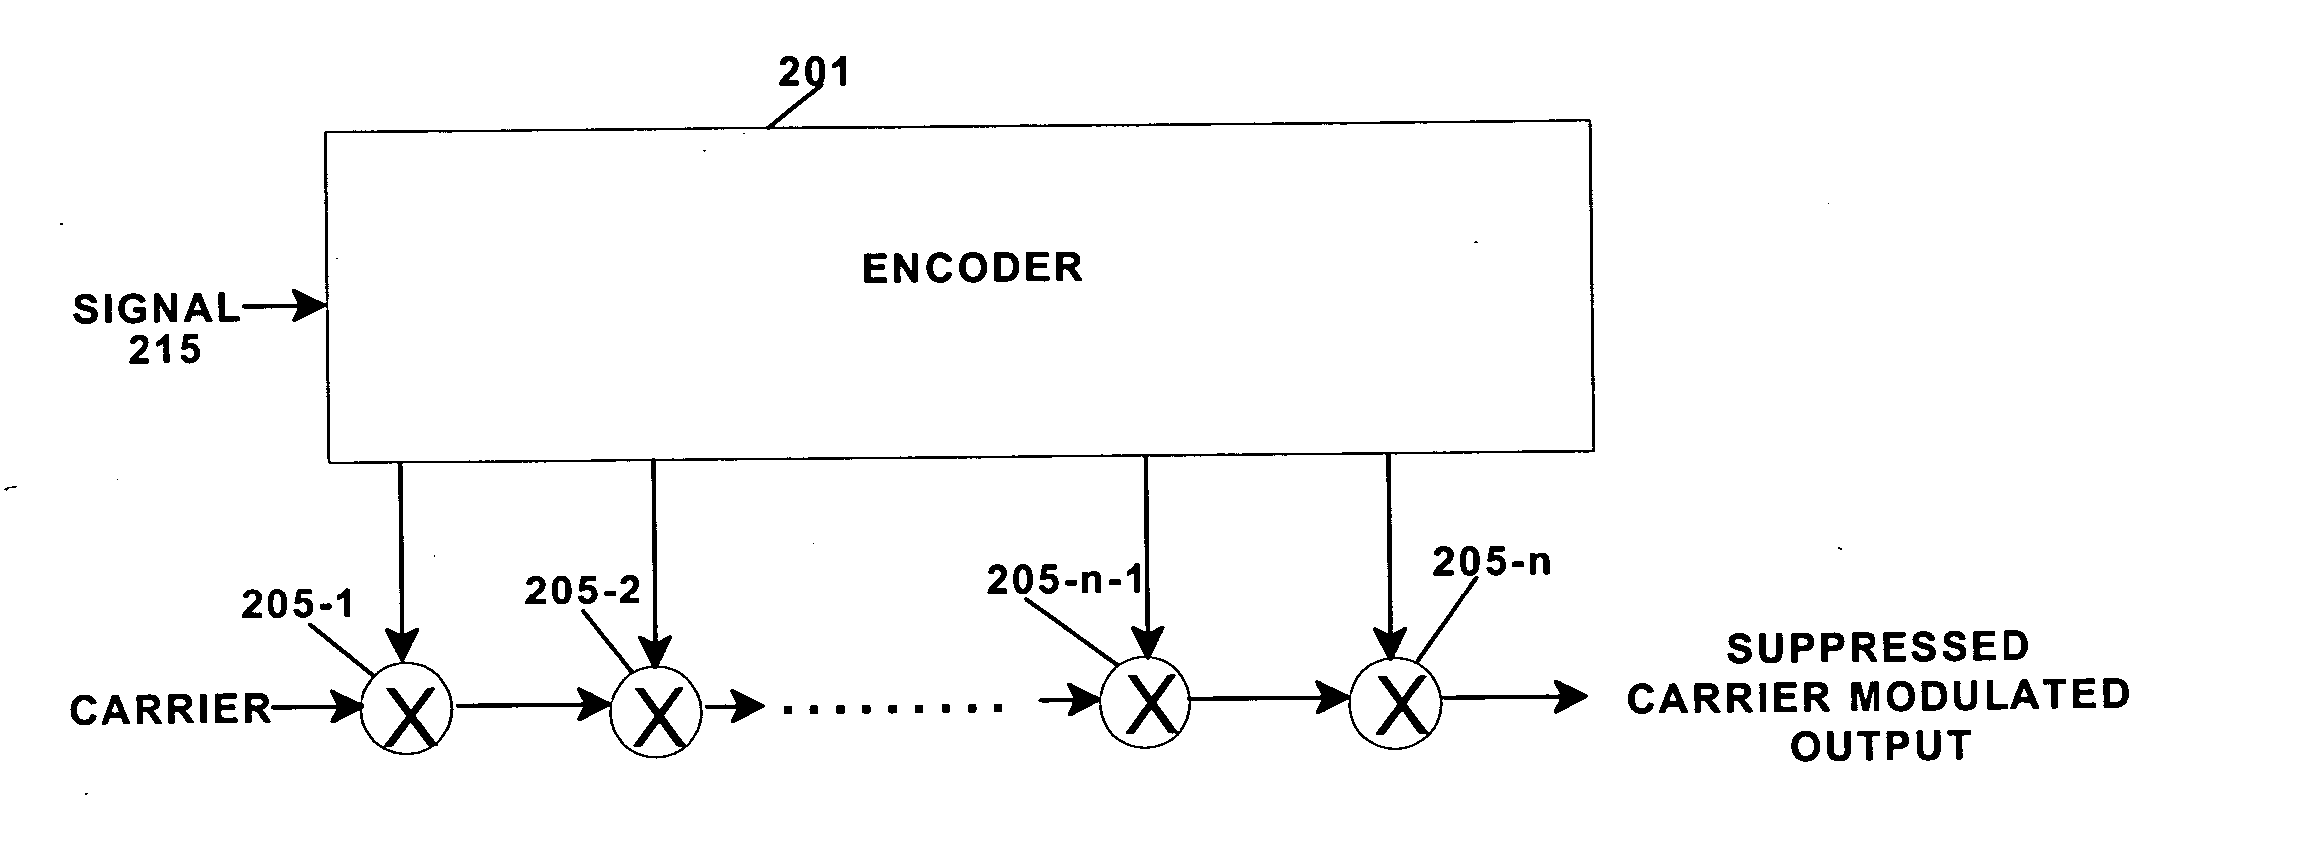 Carrier suppression type modulator with encoded modulating signals